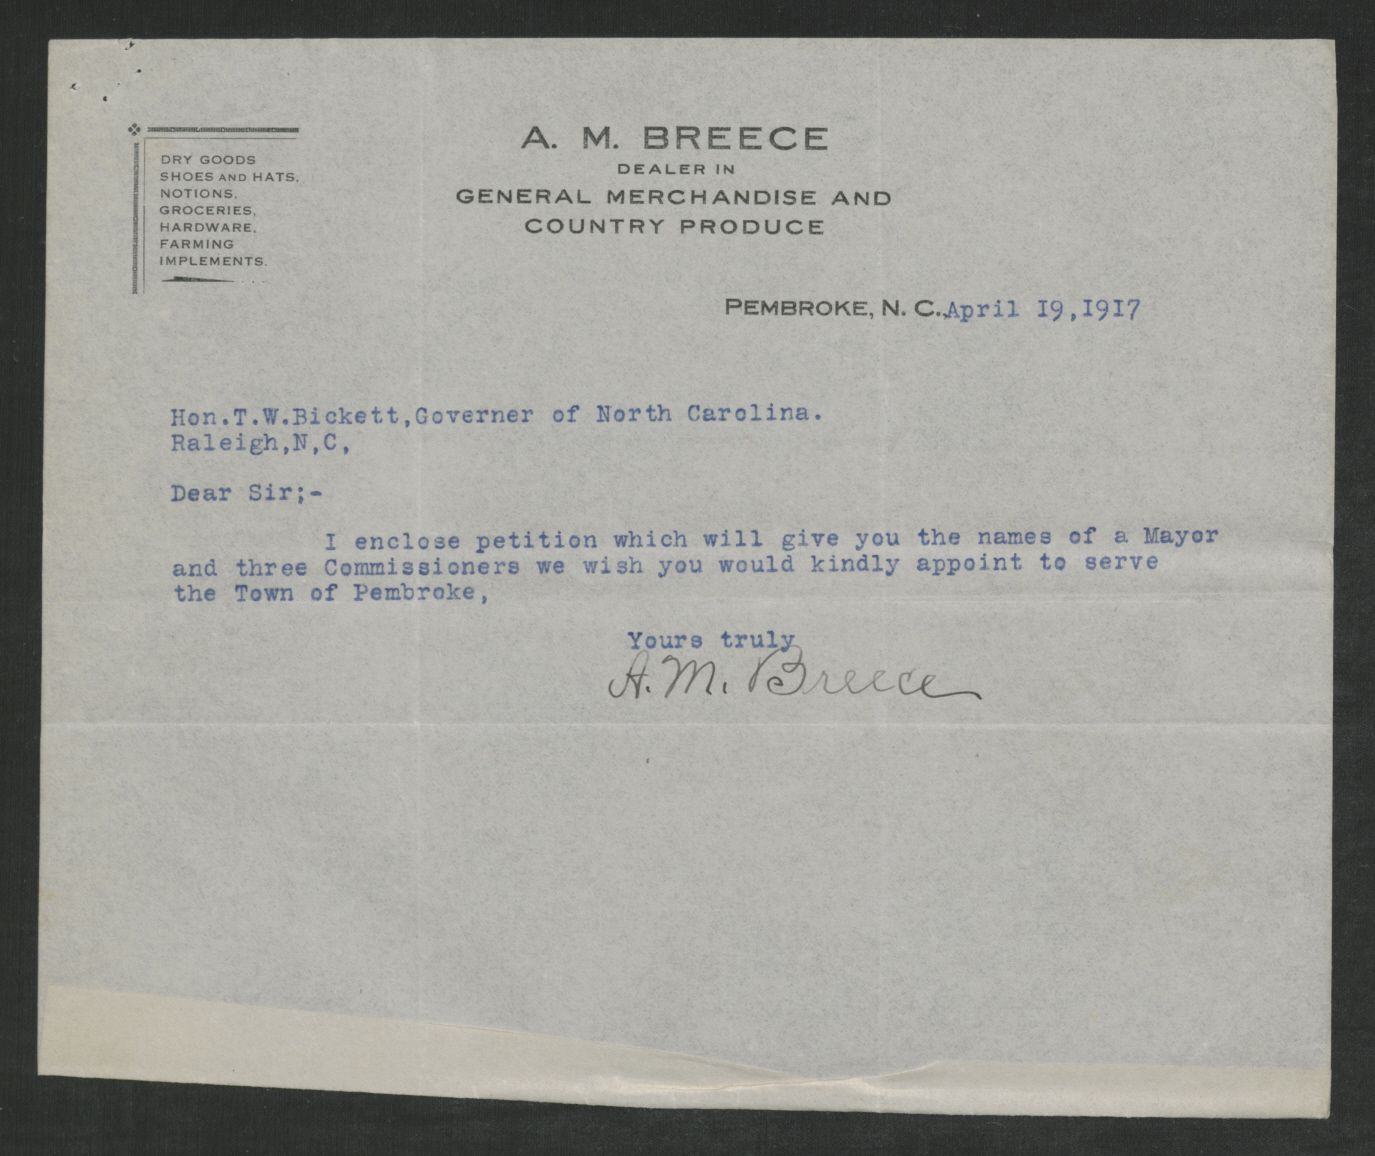 Letter from A. M. Breece to Gov. Bickett, April 19, 1917